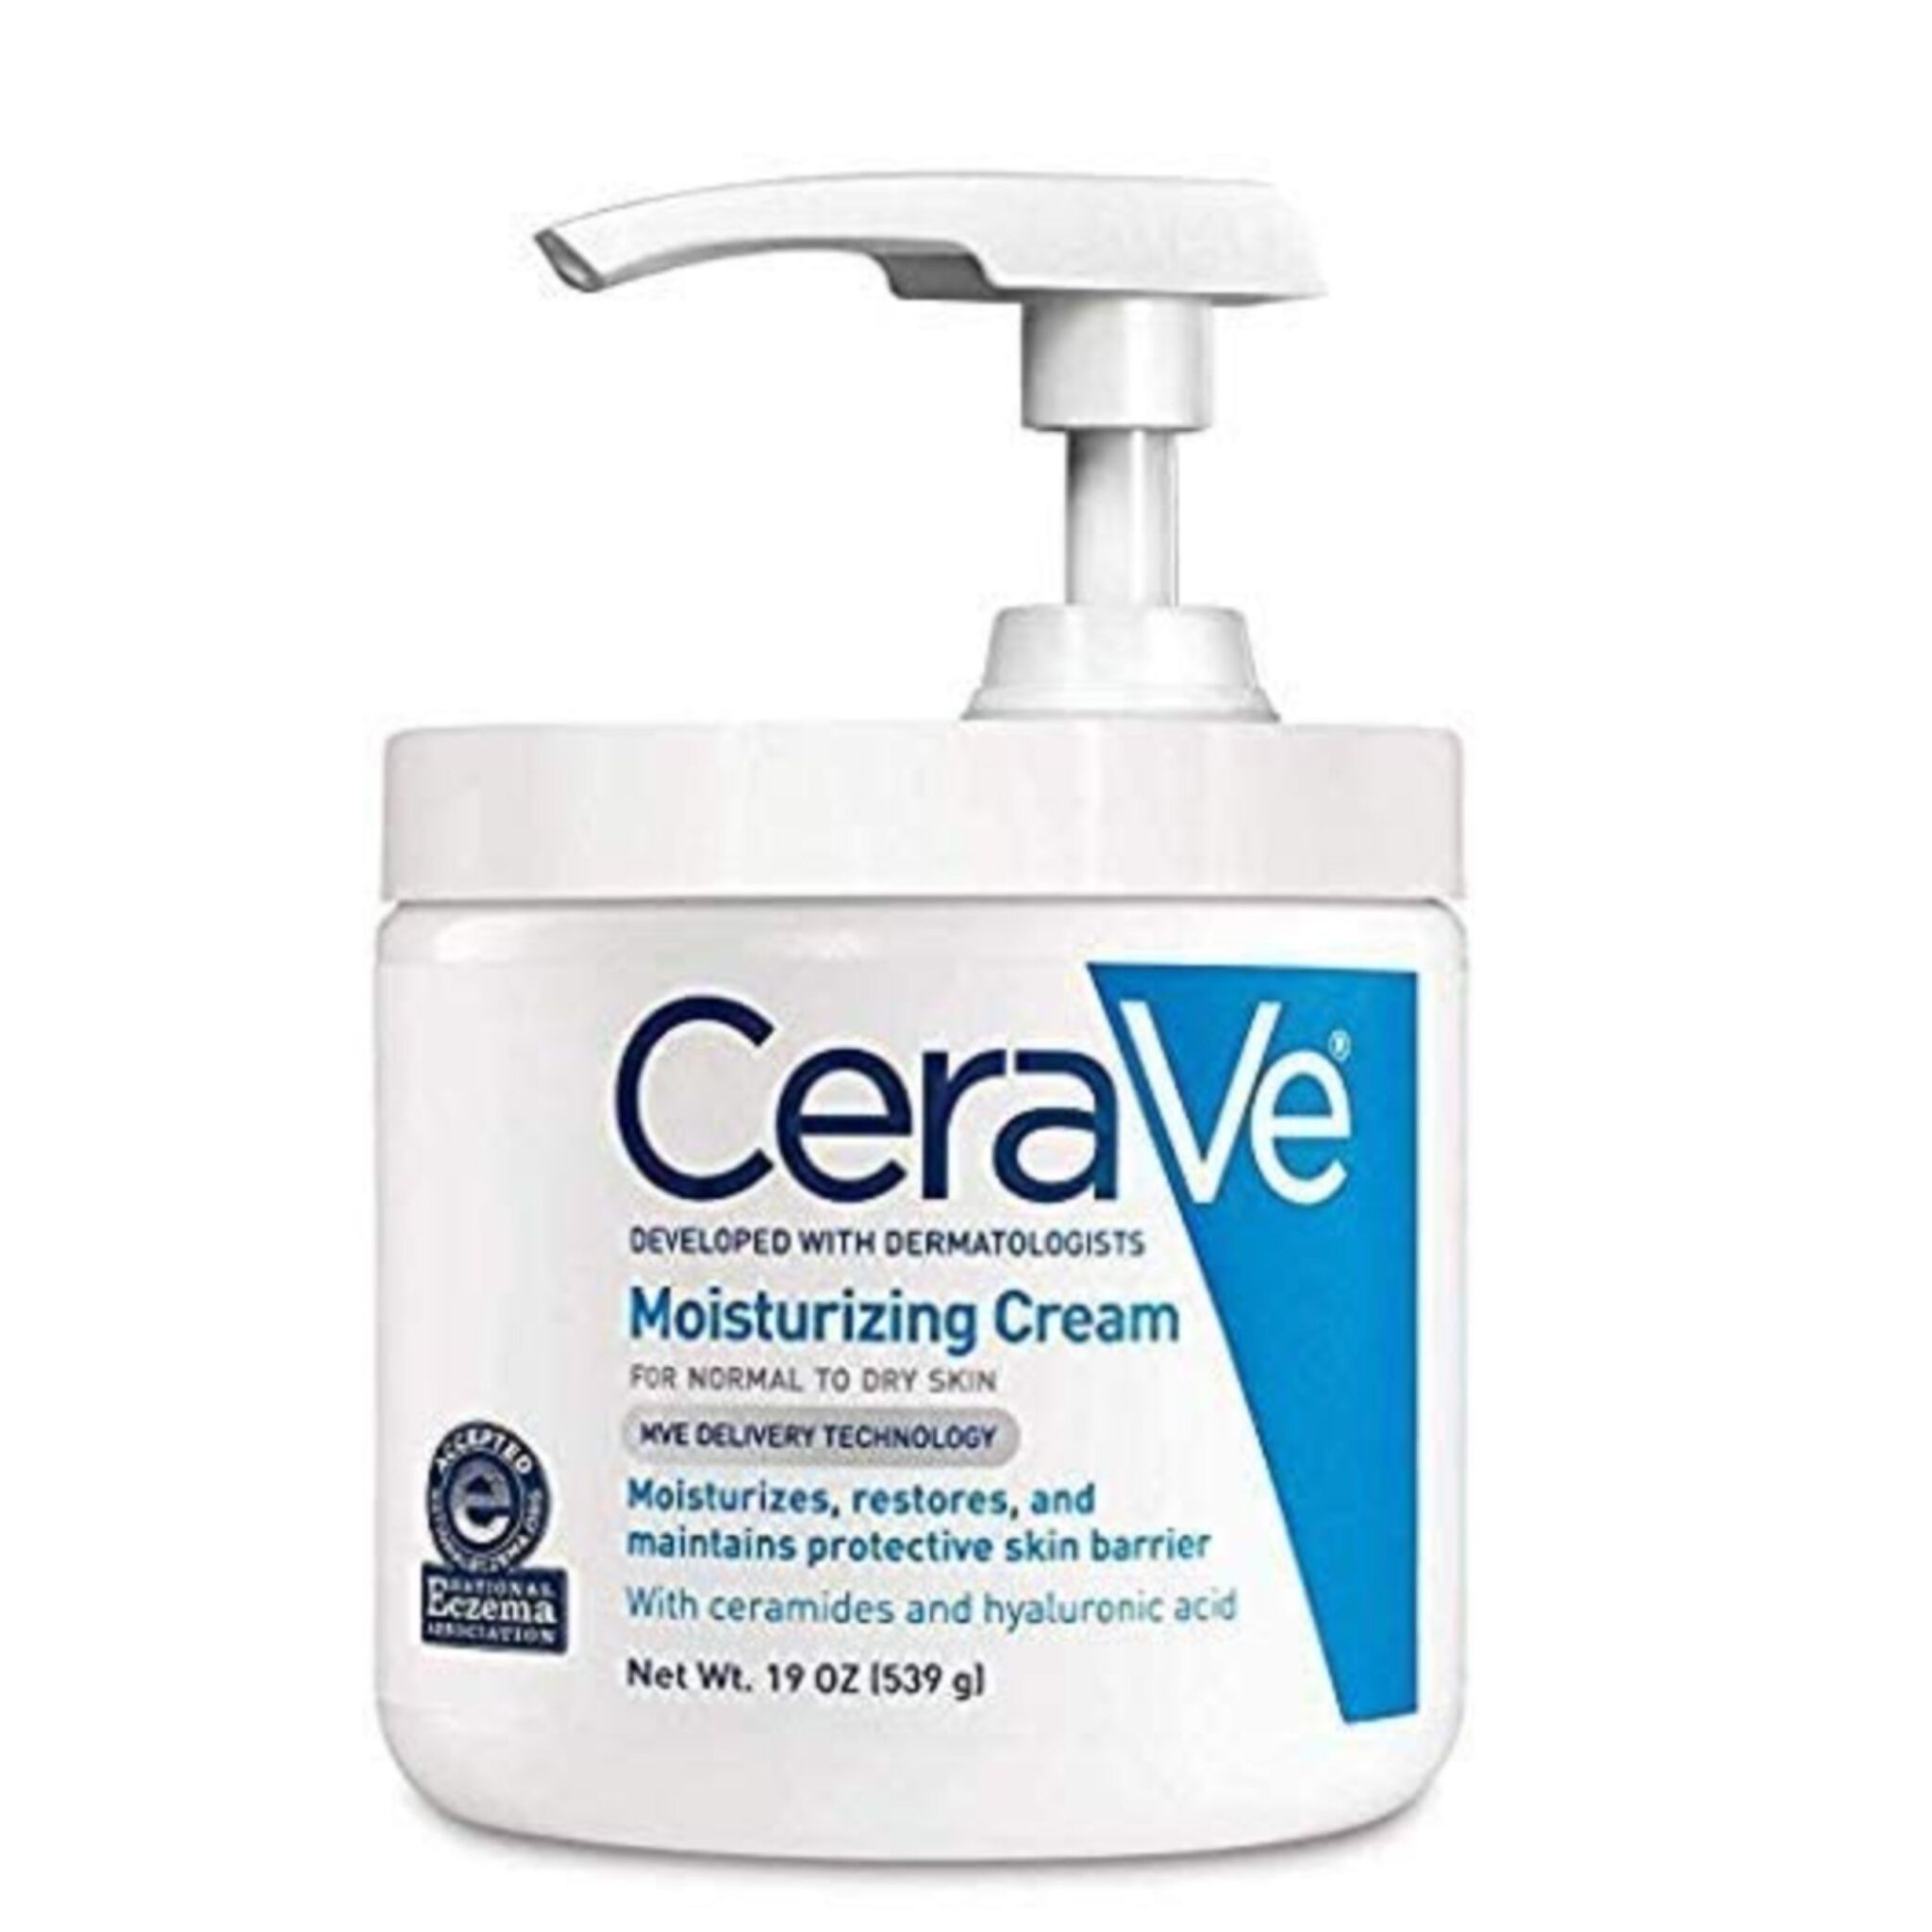 The CeraVe Moisturizing Cream is a great moisturizer to use after getting a spray tan.